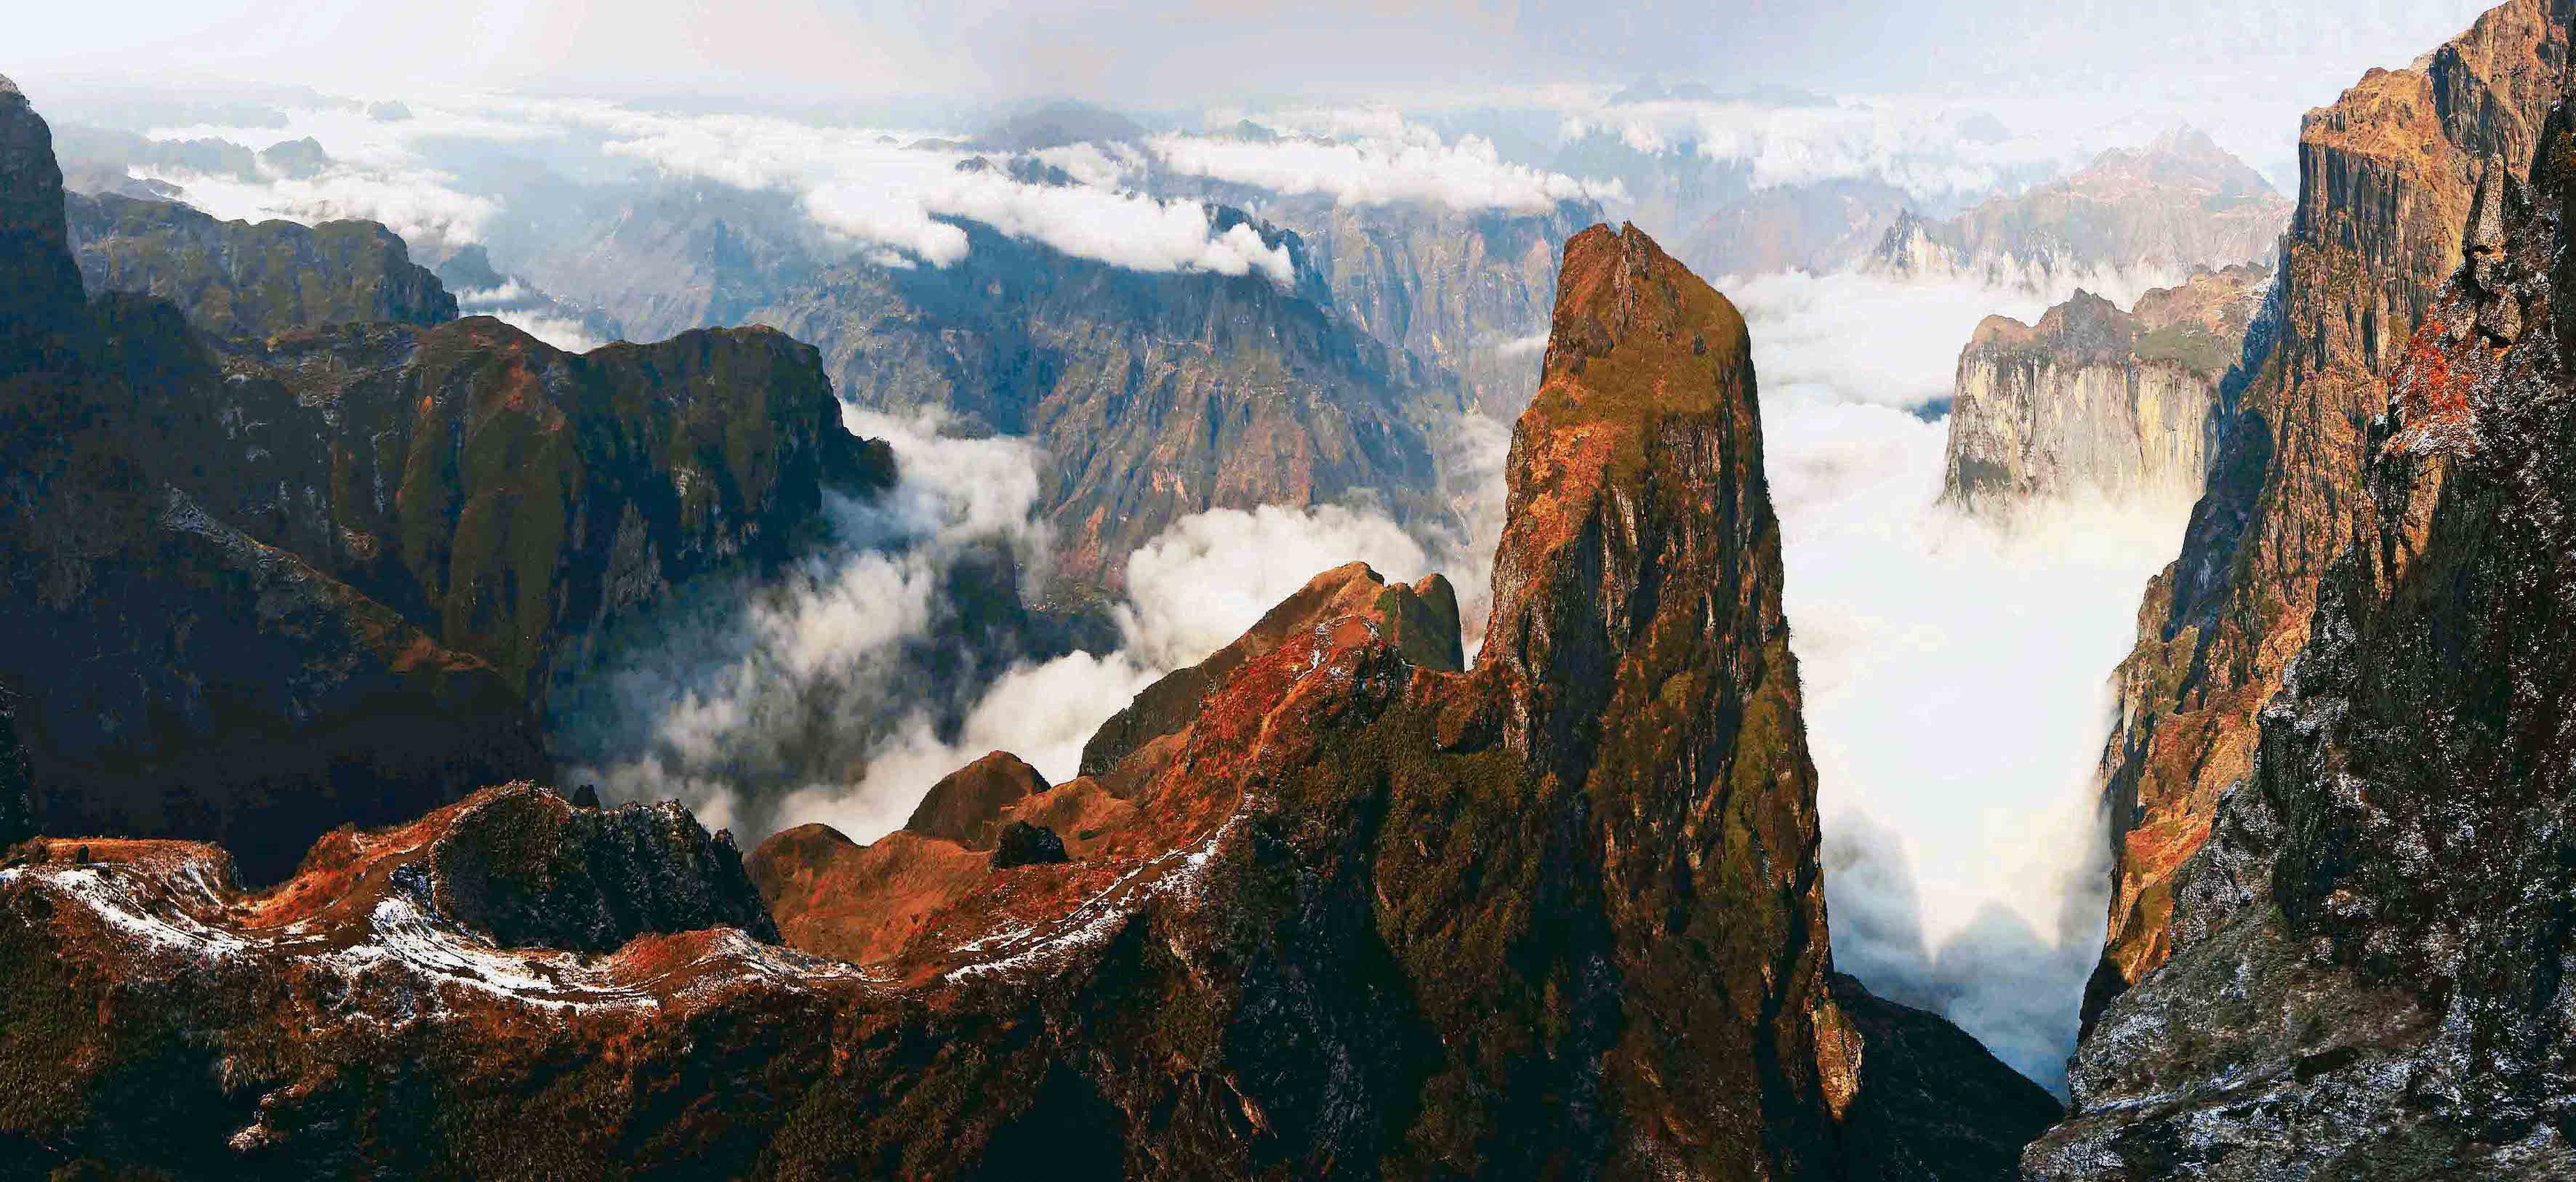 Spectacular Yunnan: The grand canyons of west China